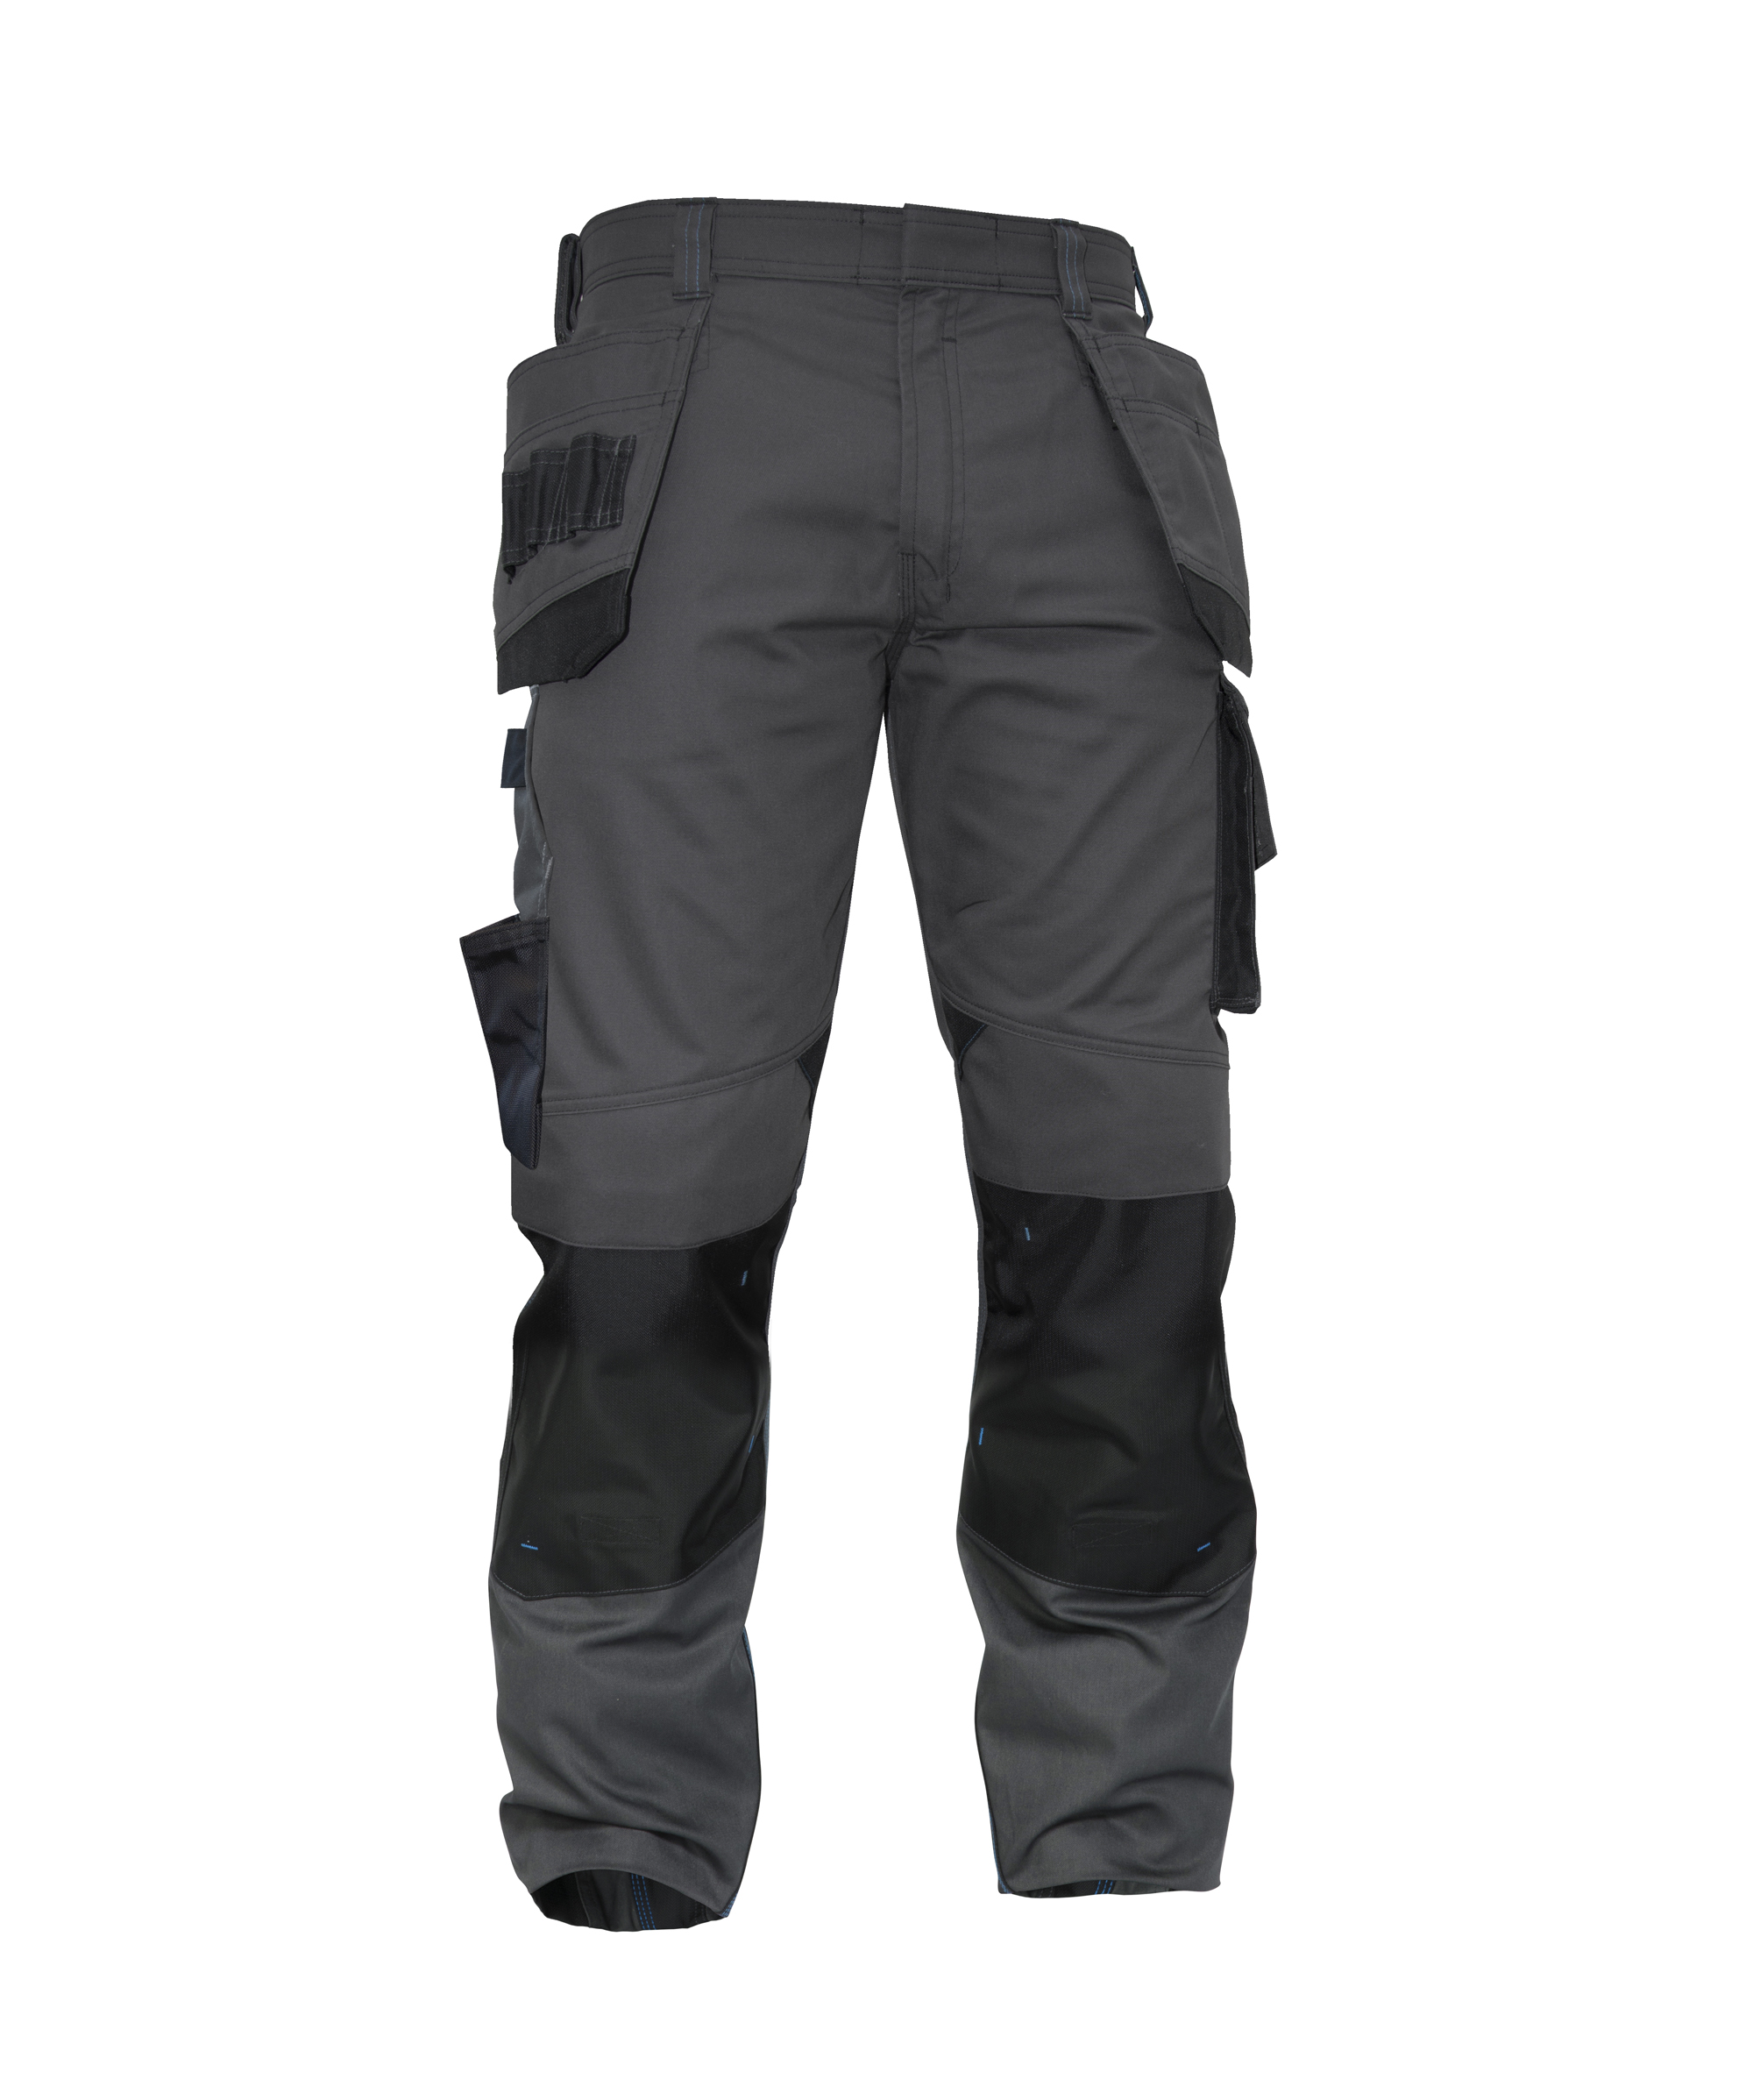 magnetic_two-tone-work-trousers-with-multi-pockets-and-knee-pockets_anthracite-grey-black_front.jpg